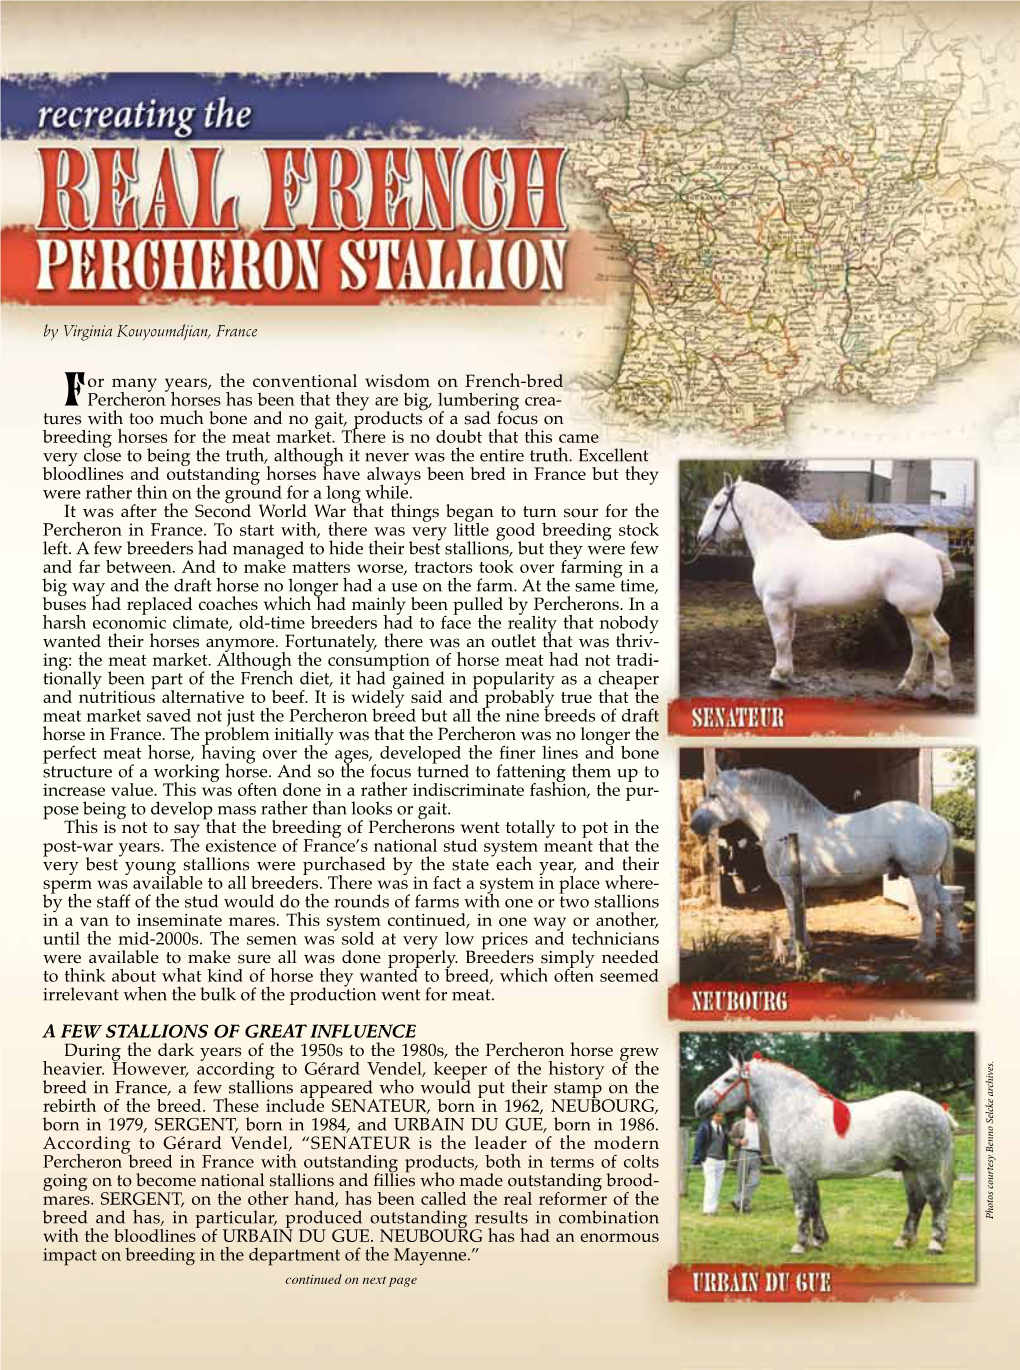 For Many Years, the Conventional Wisdom on French-Bred Percheron